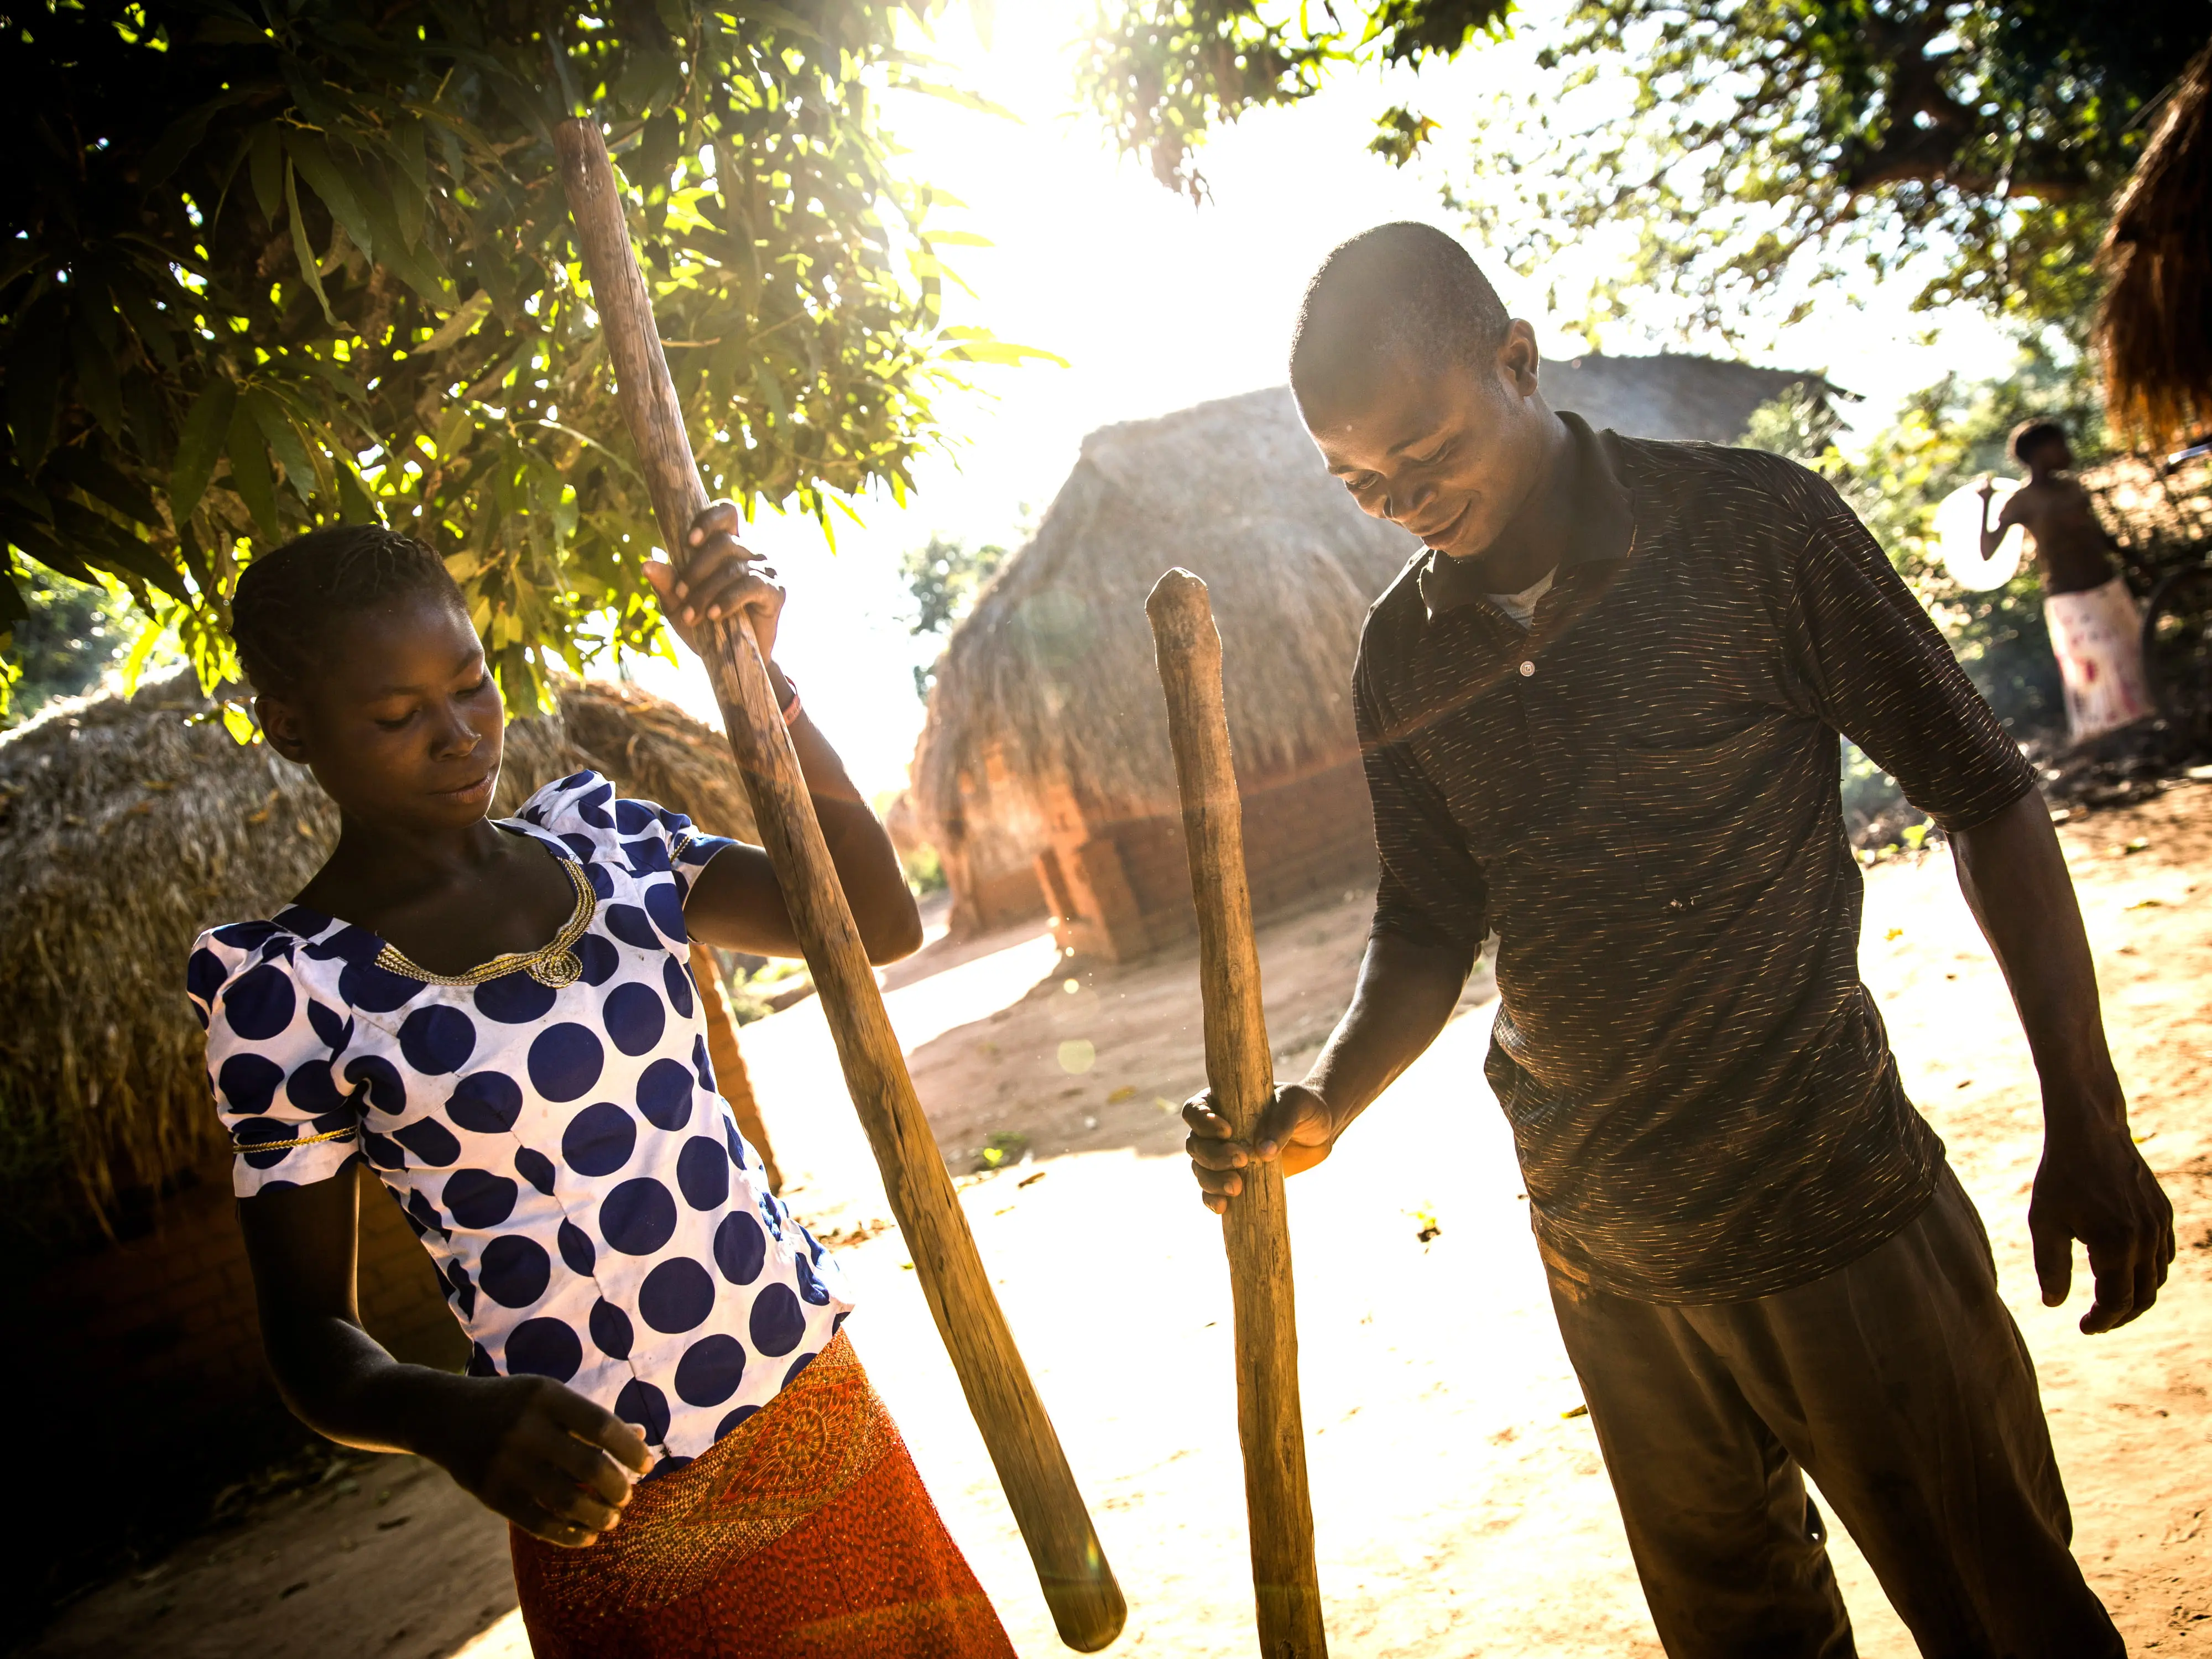 George Mukaly Ngoyi (31) and Natalie Ngoyi (20) prepare cassava flour together in the town of Pension, Manono Territory.